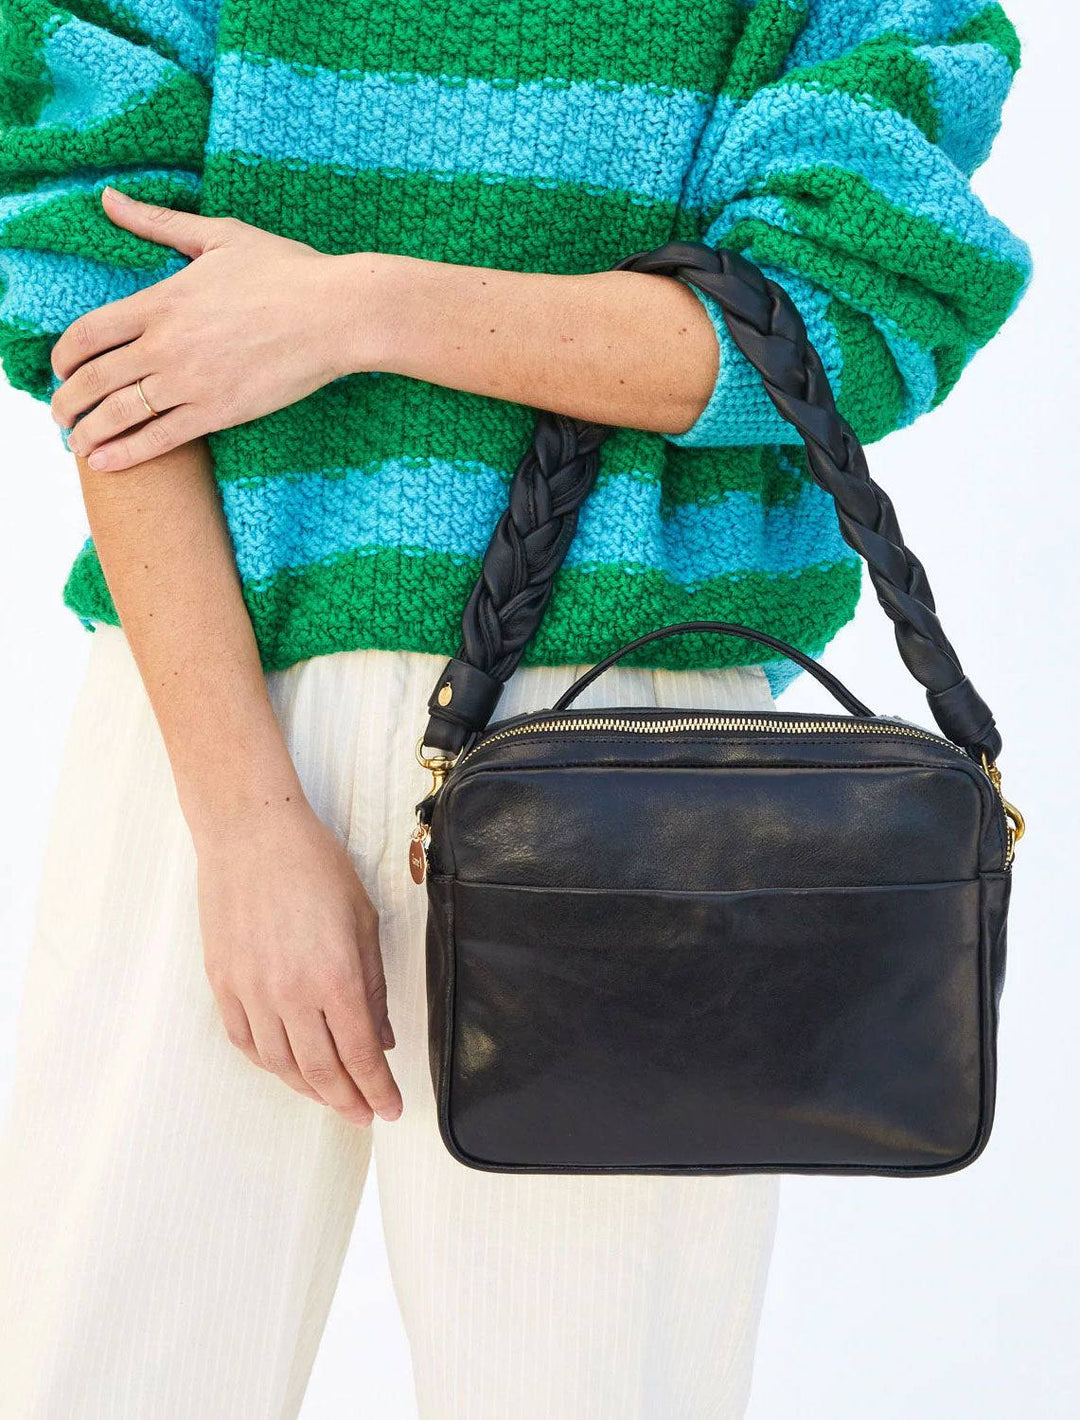 model carrying midi sac with the braided leather shoulder strap in black attached on d-rings